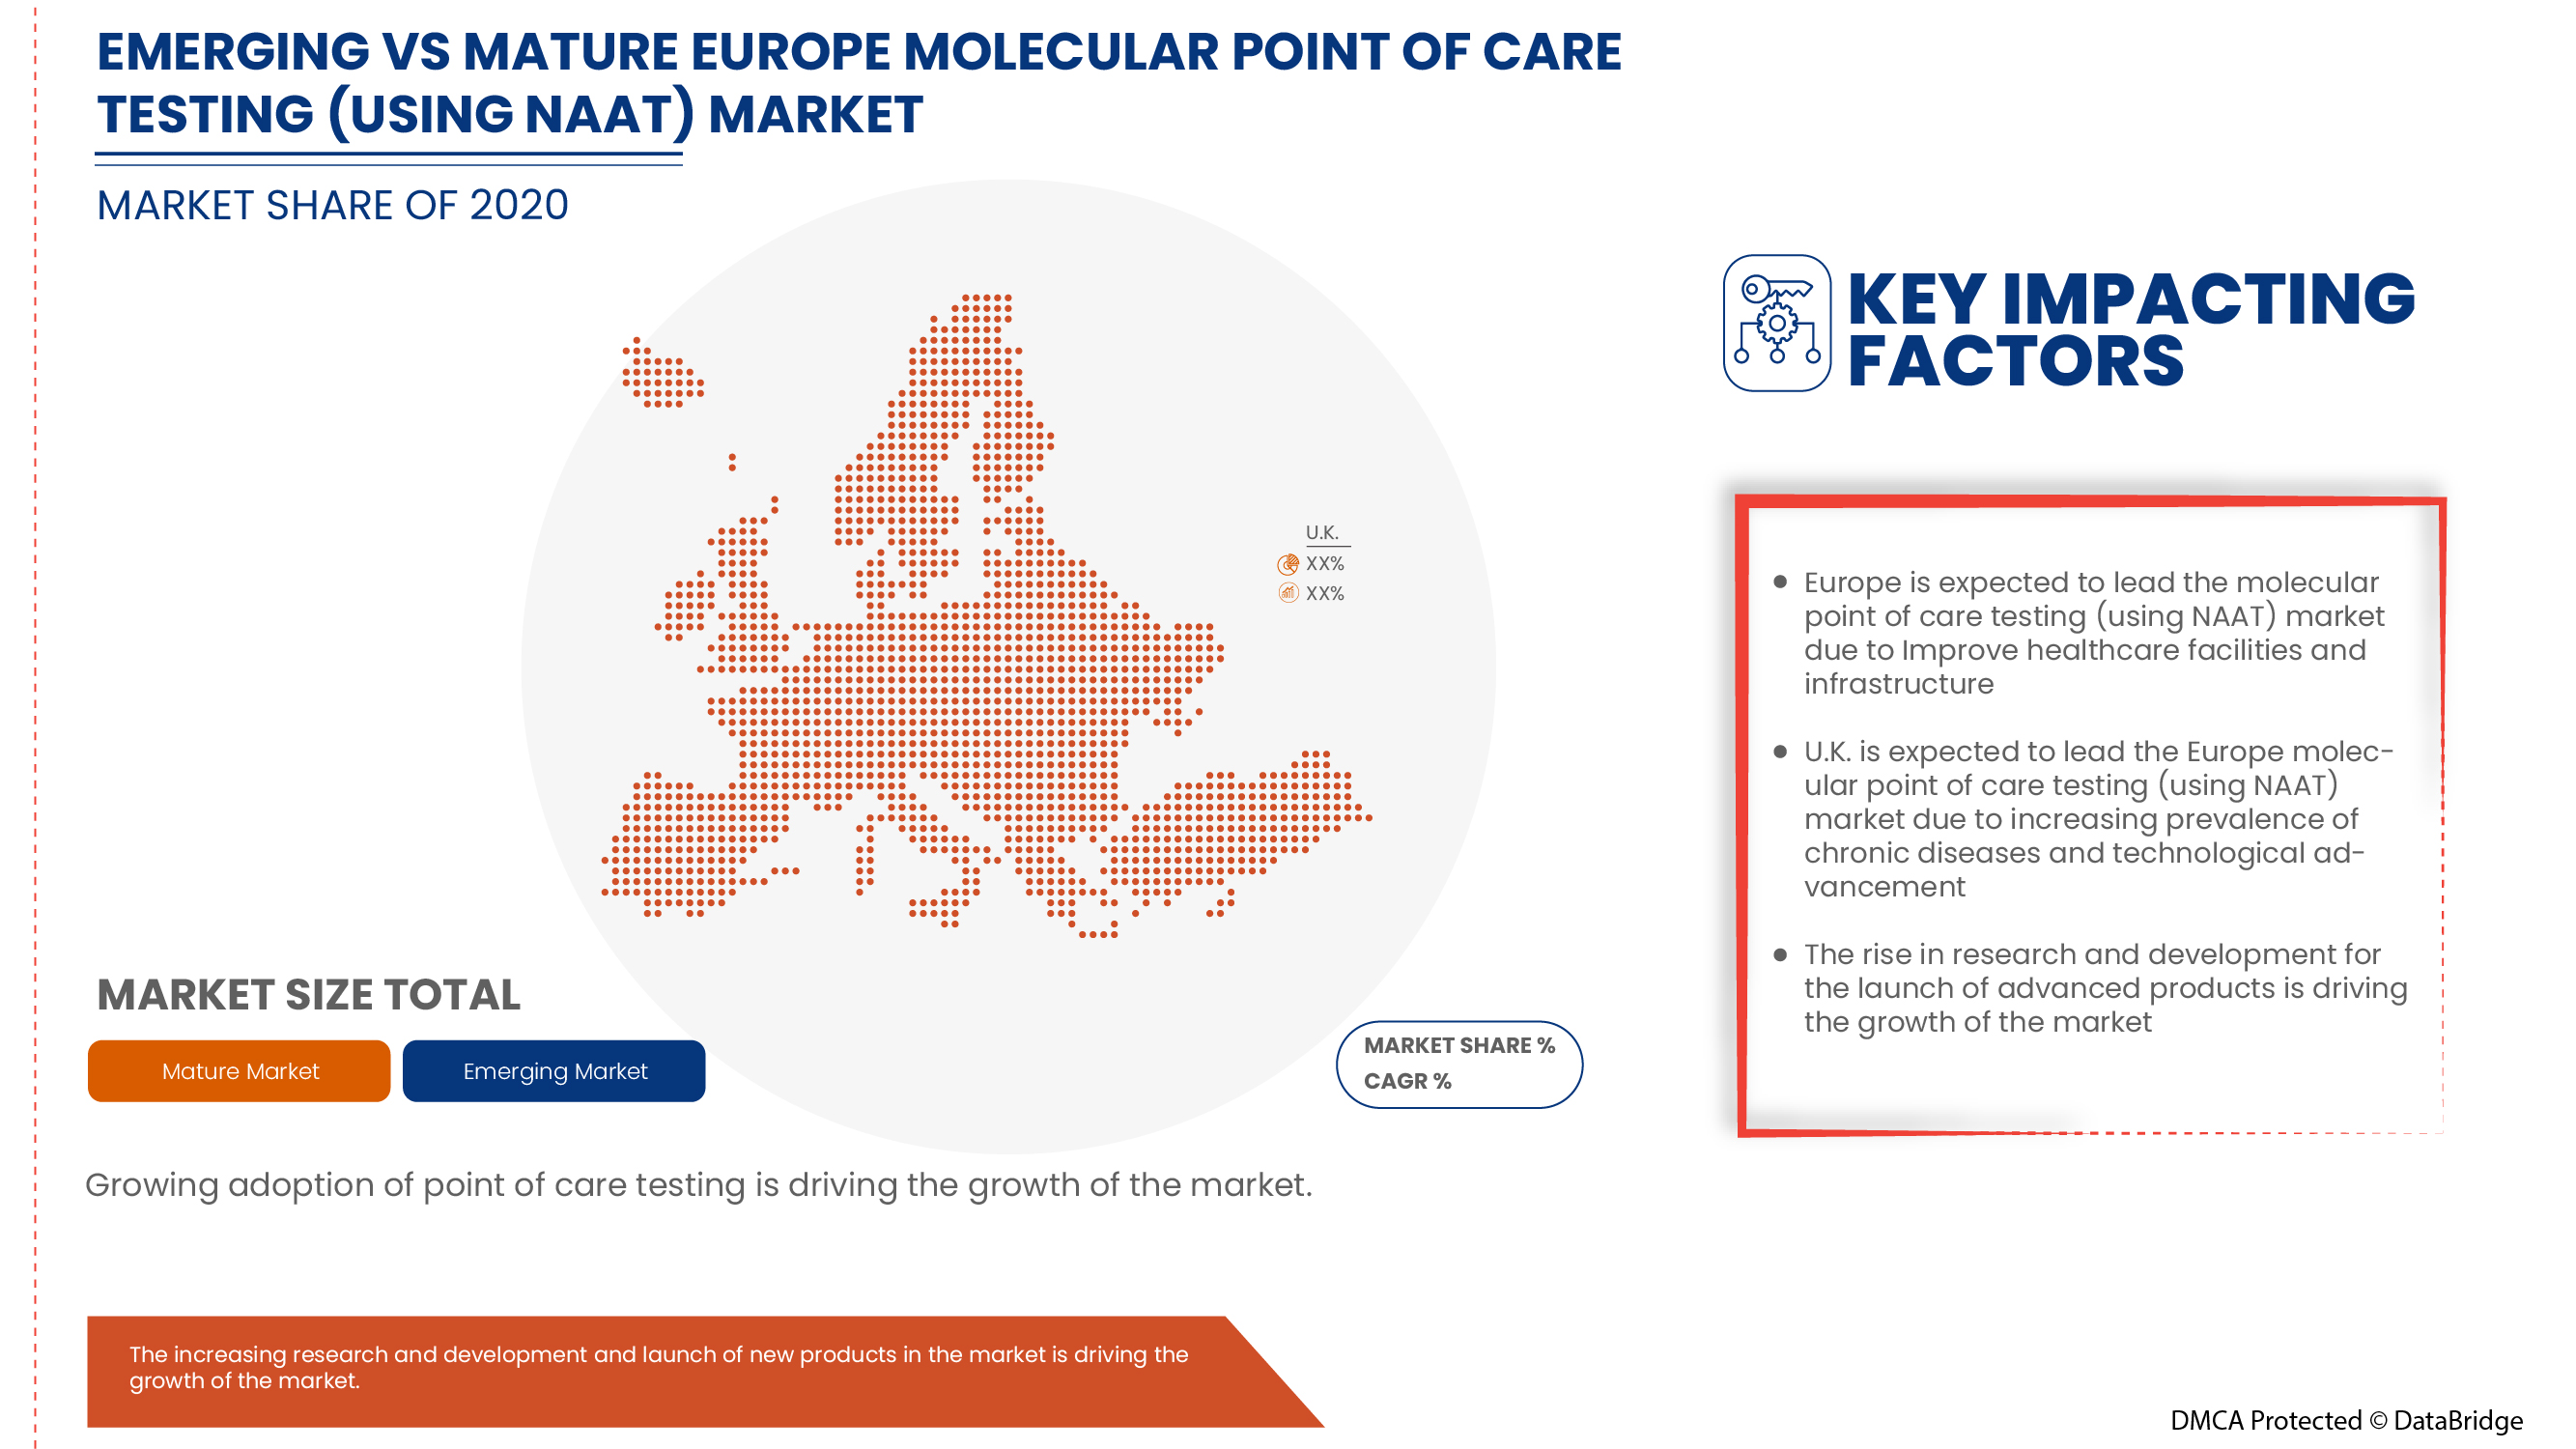 Molecular Point of Care Testing (using NAAT) Market